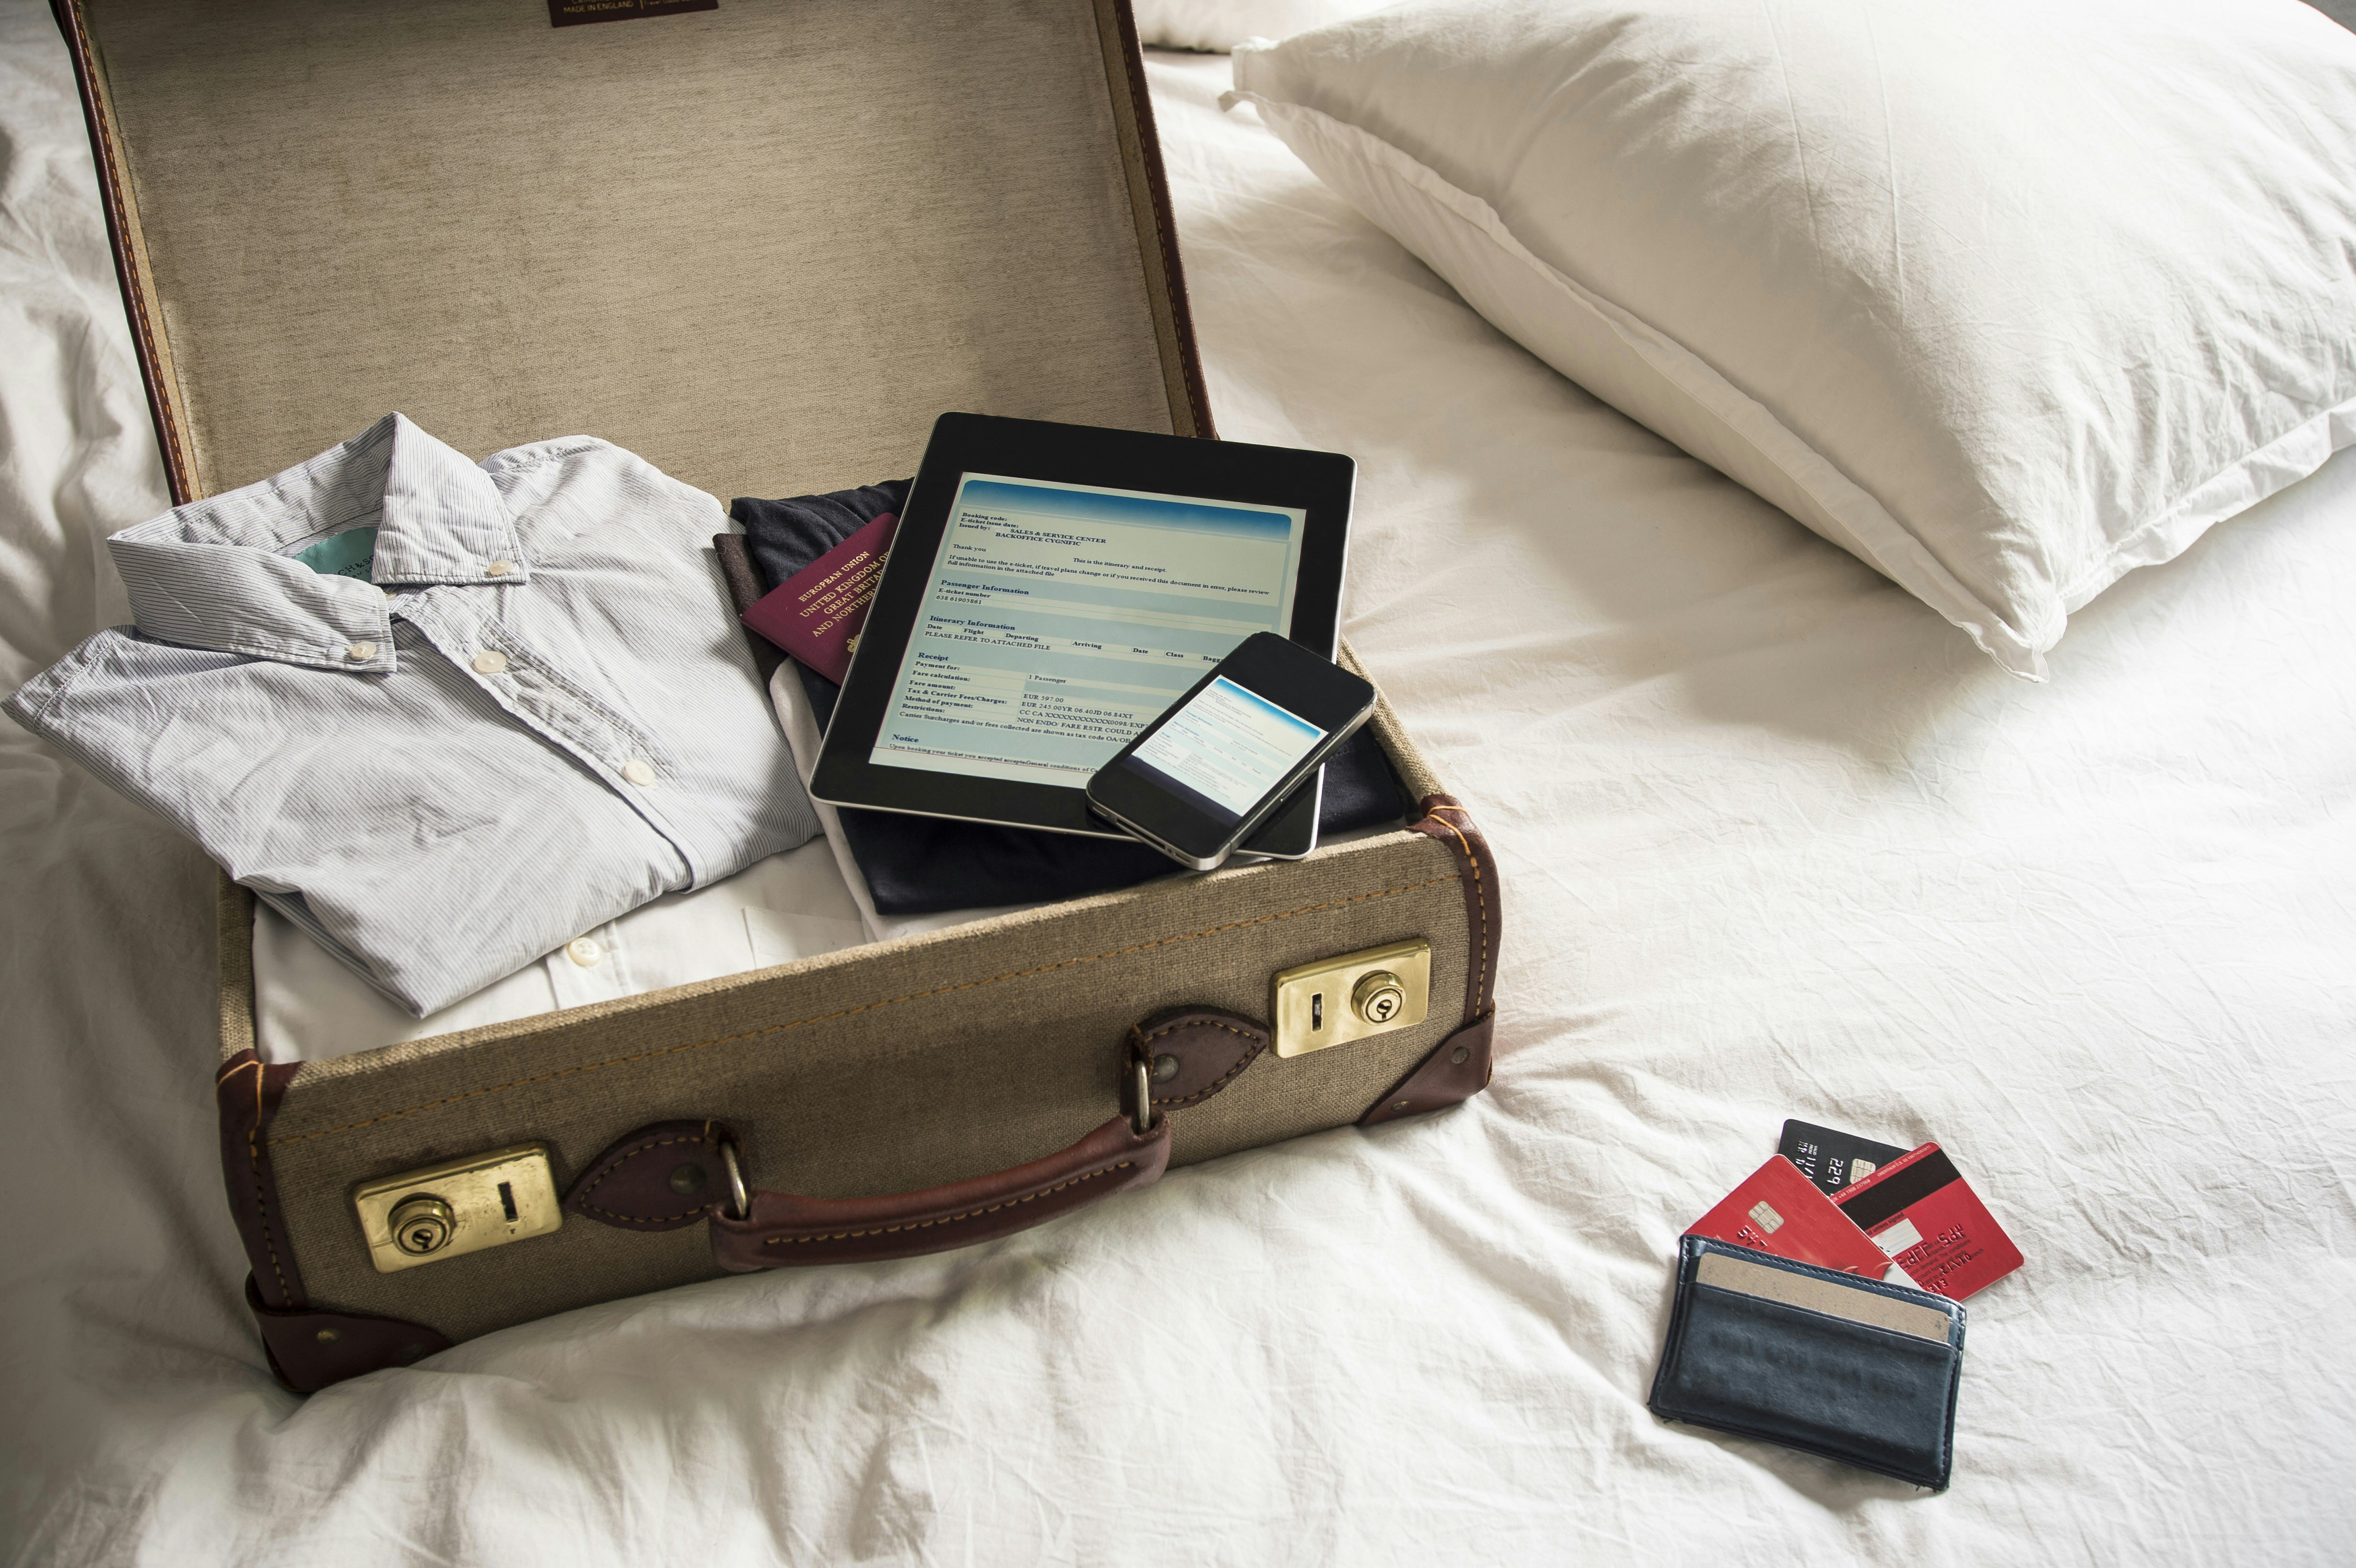 An open suitcase, with ipad, phone and passport inside